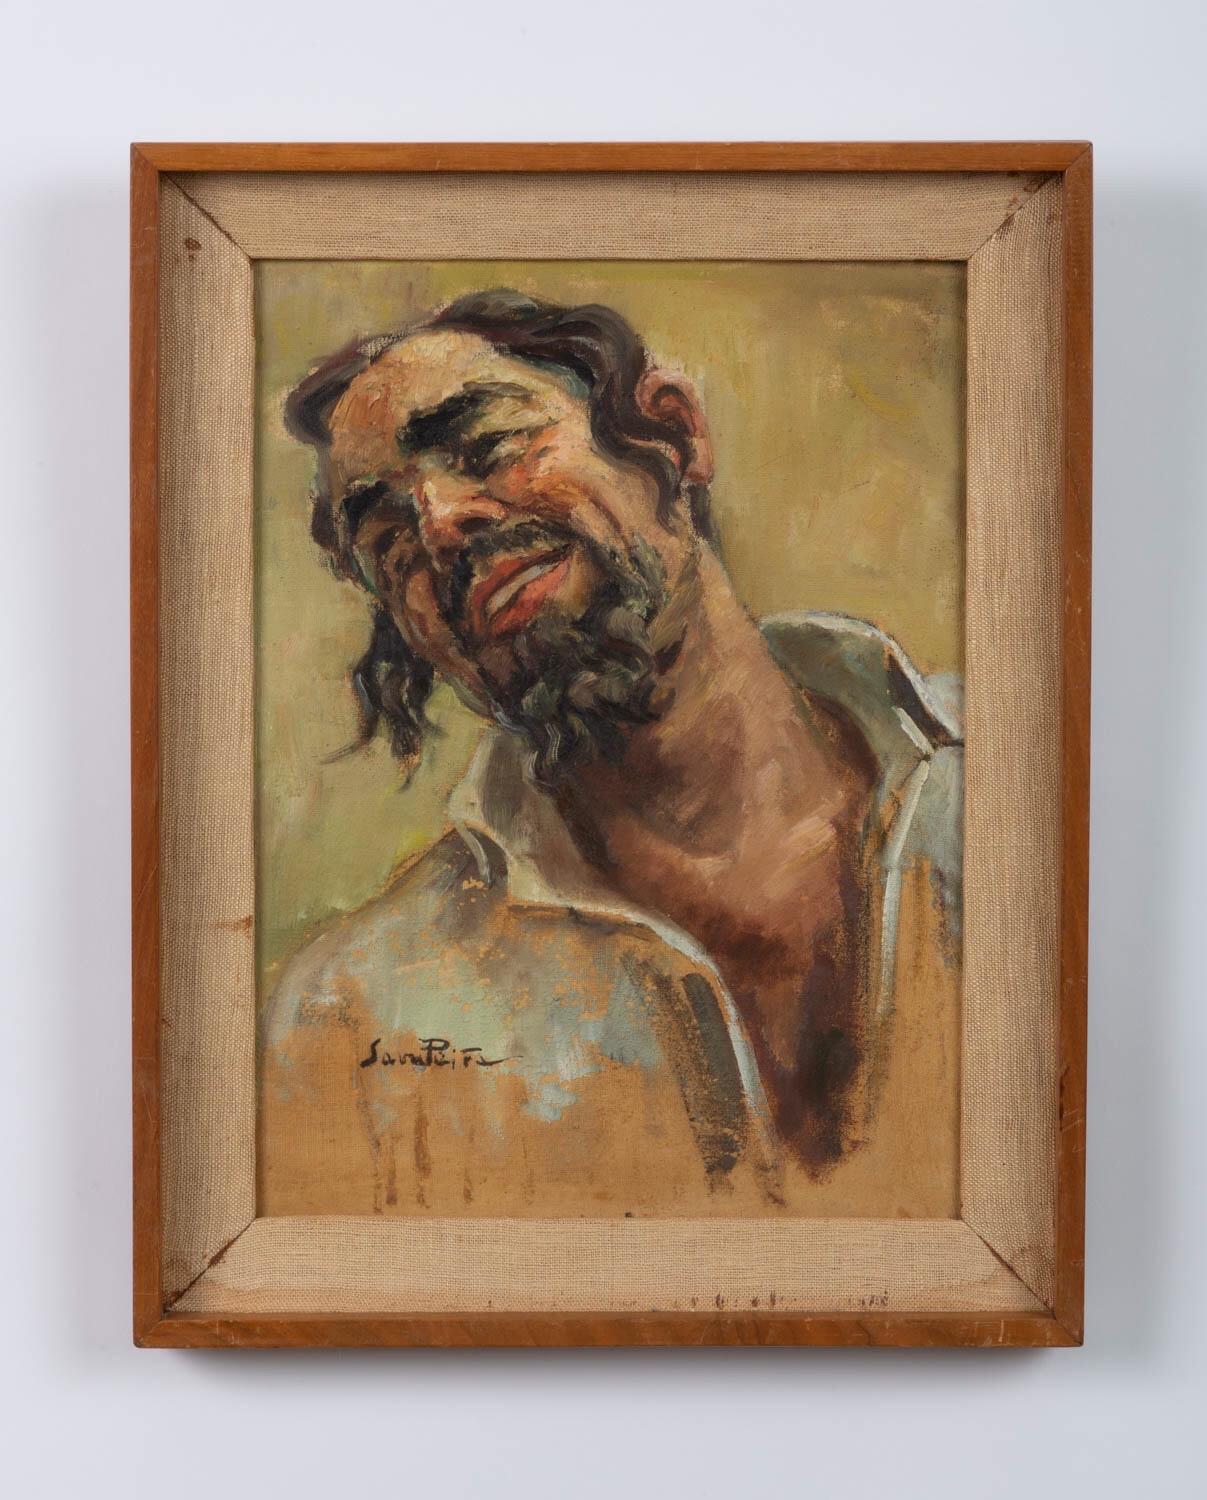 Oil painting on canvas by Sara Peita, depicting a portrait of a smiling man in the Post-Impressionist style. This piece features beautiful strokes of rich green blacks and soft pastel hues. Original linen mat and wood frame. Signed by